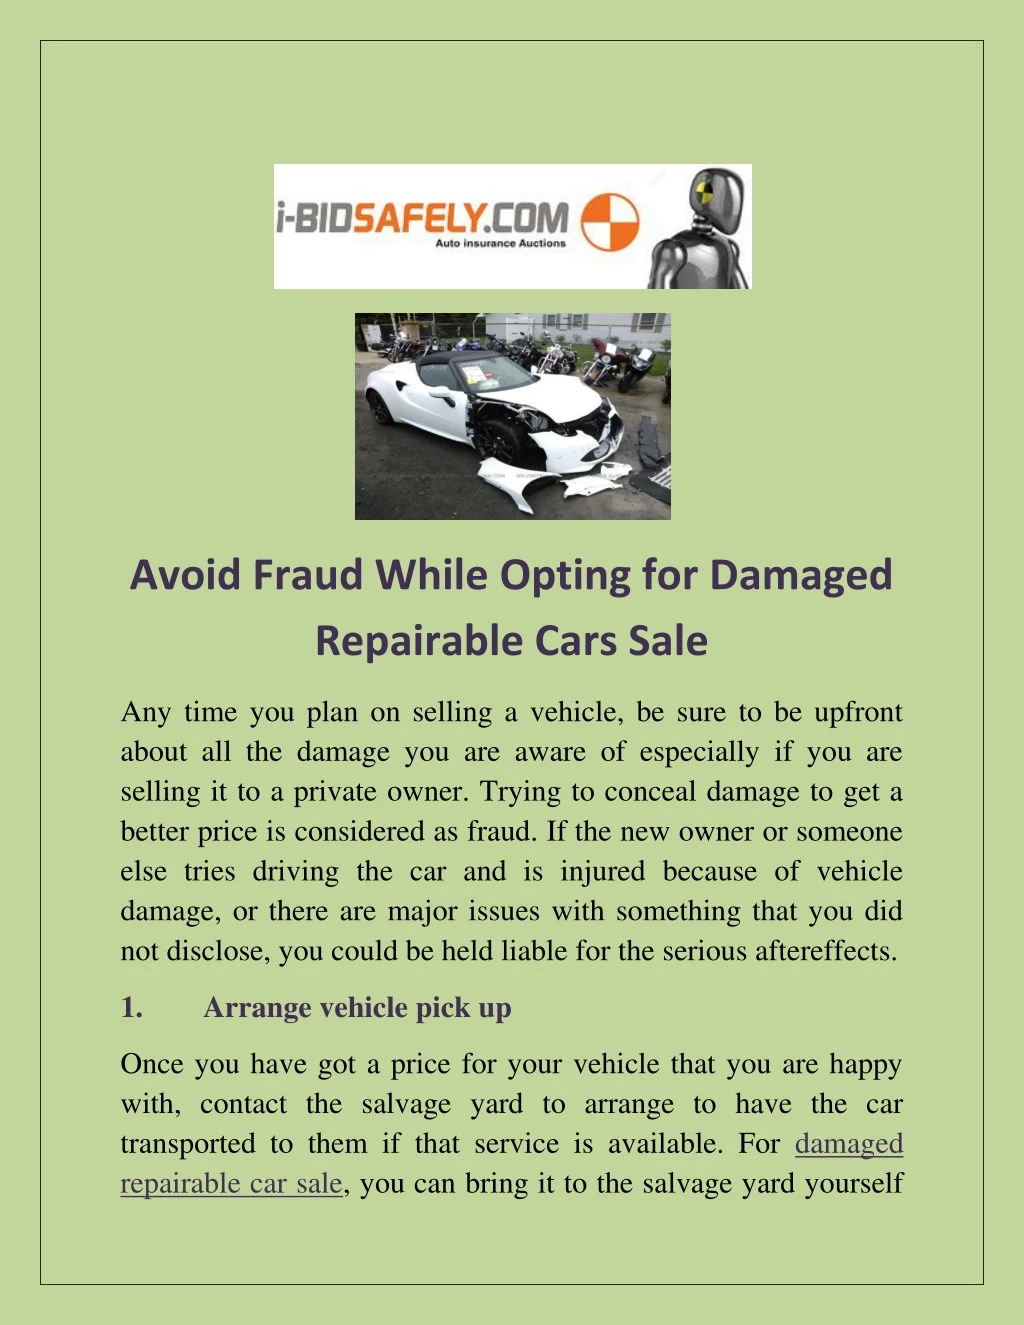 avoid fraud while opting for damaged repairable